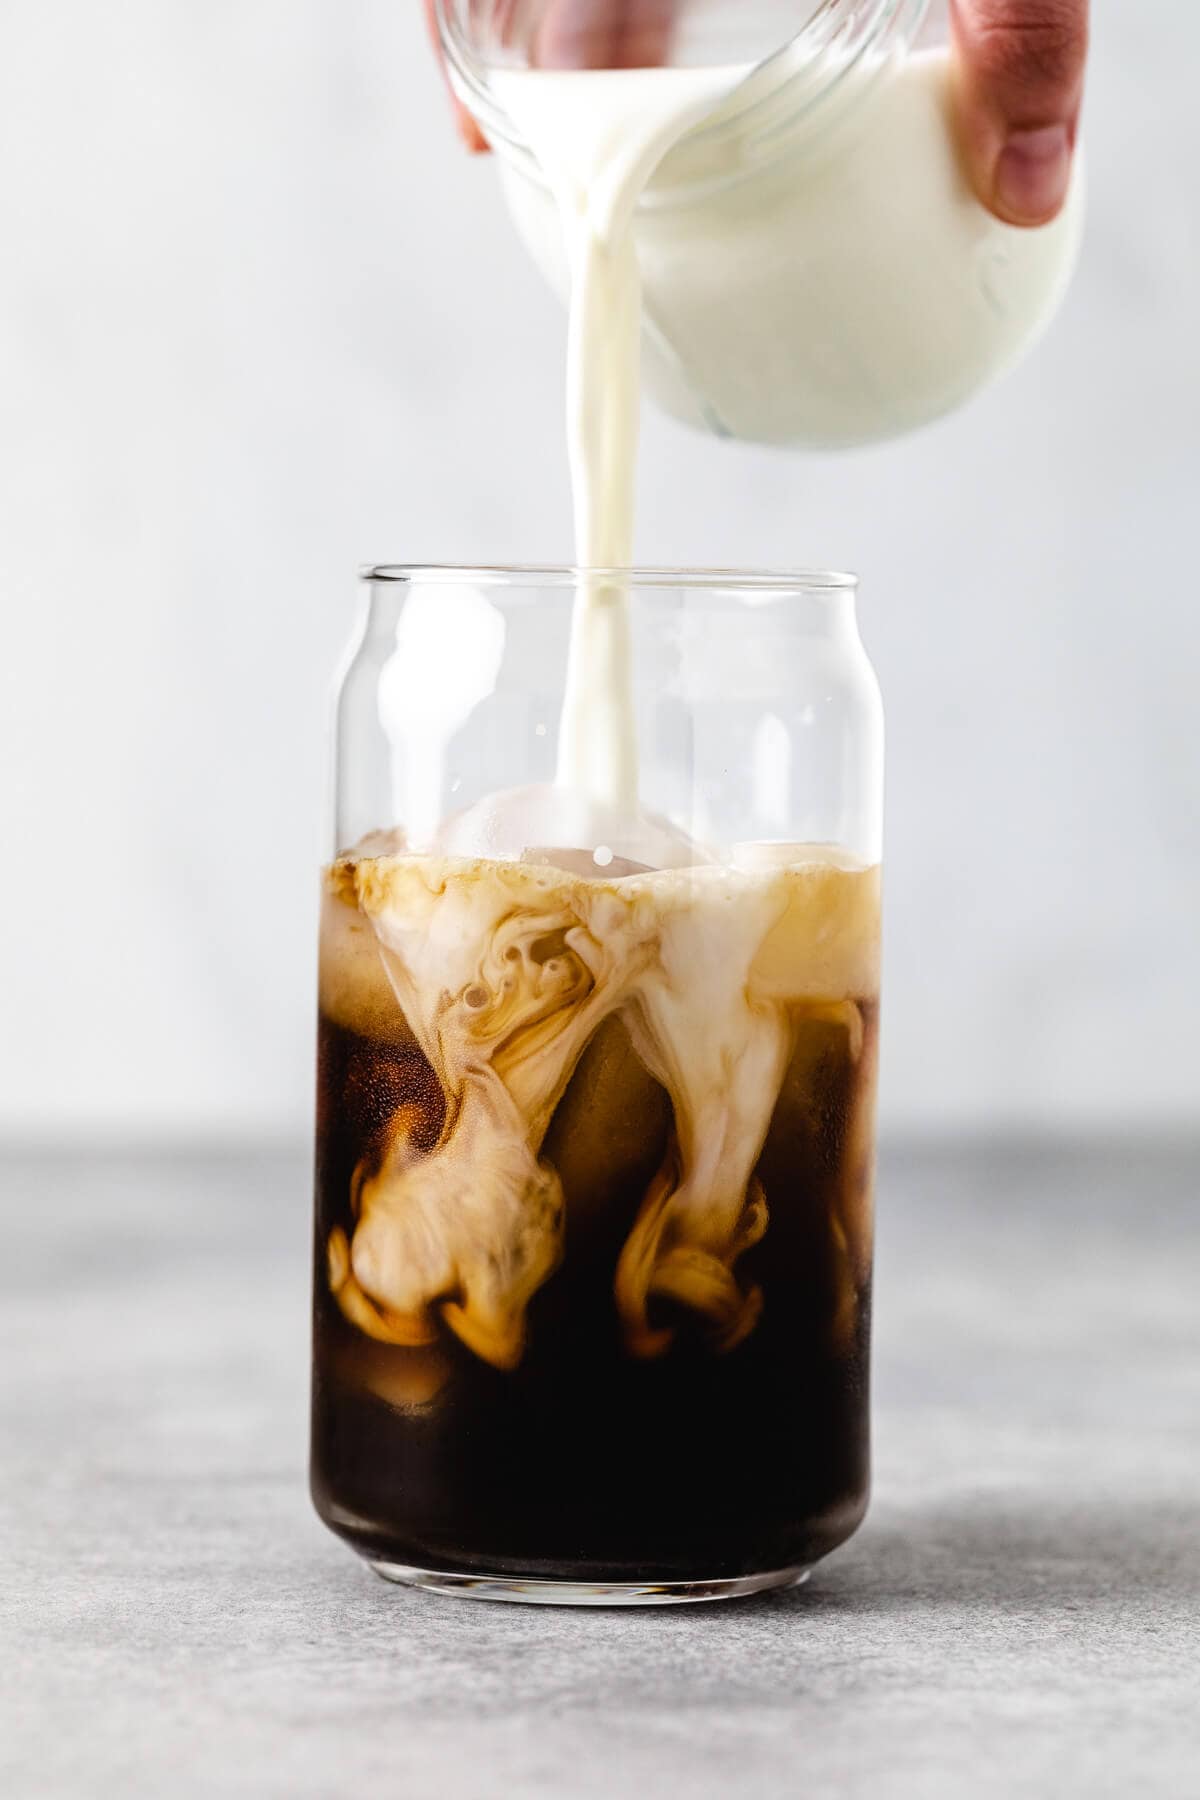 Milk being poured into an iced latte.